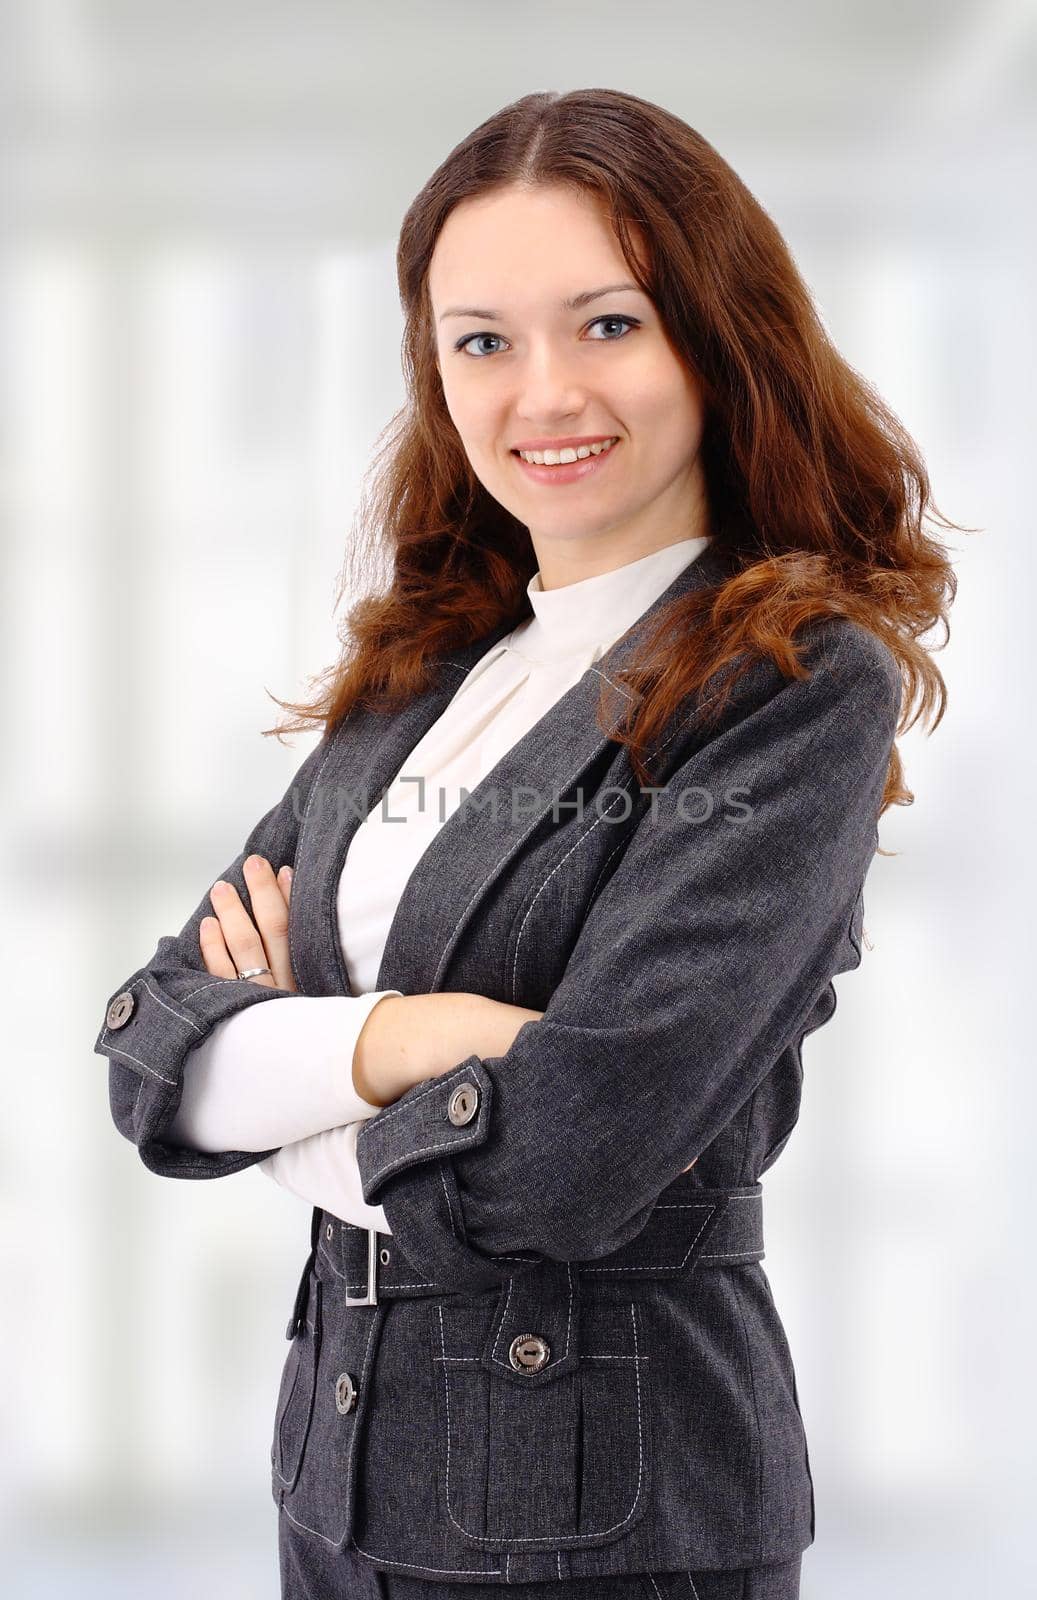 The beautiful business woman at office by SmartPhotoLab